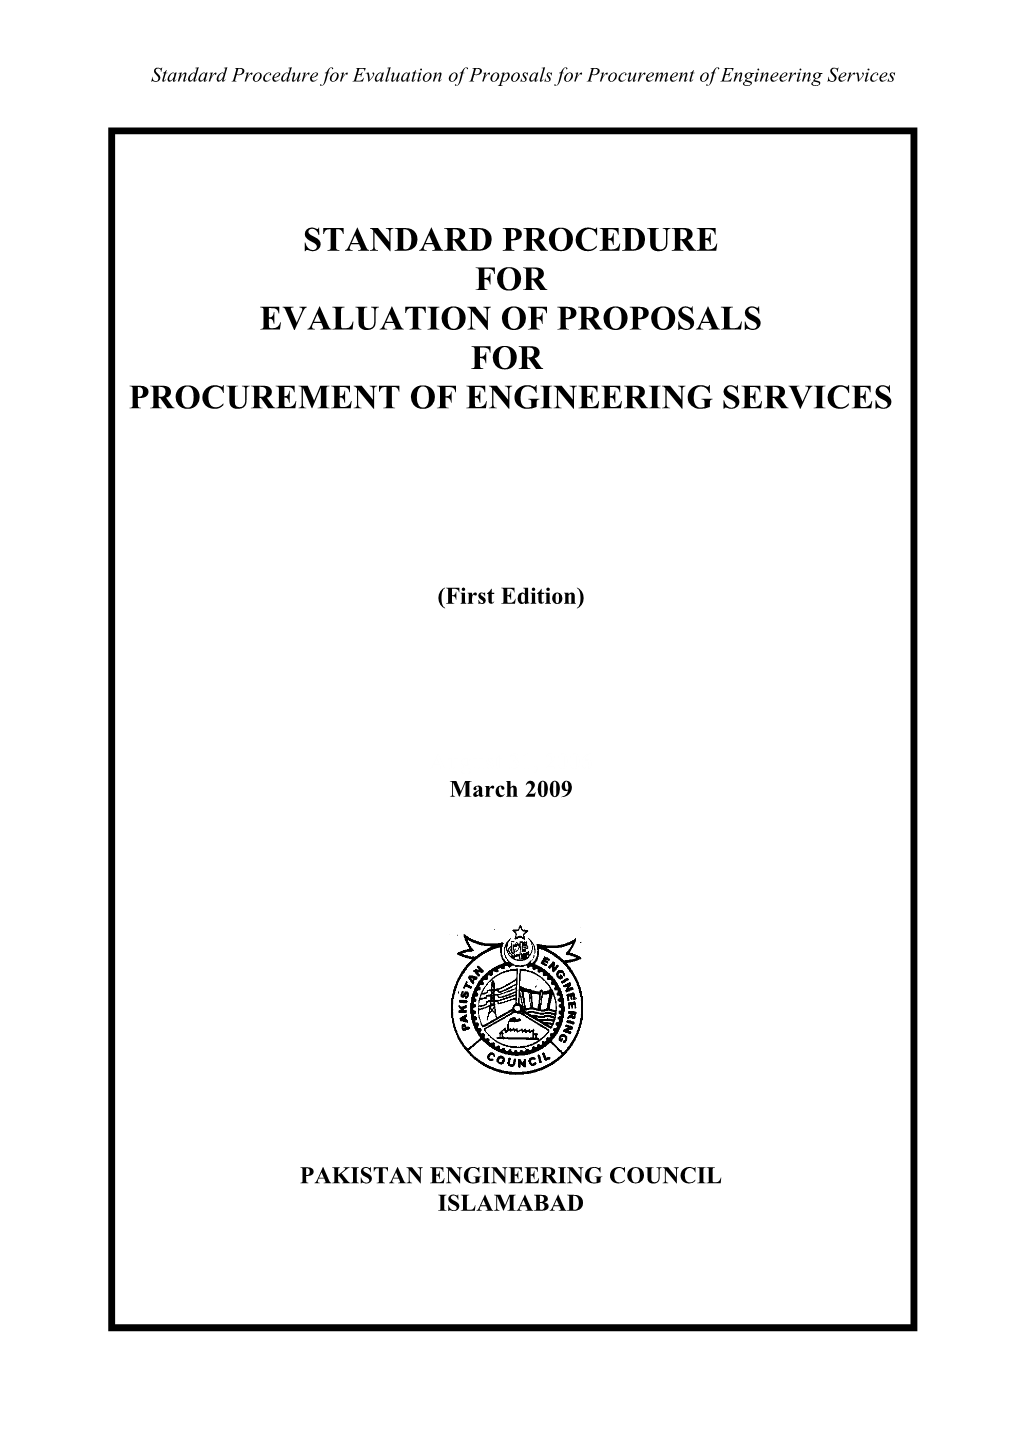 Standard Procedure Forevaluation of Proposals for Procurement of Engineering Services